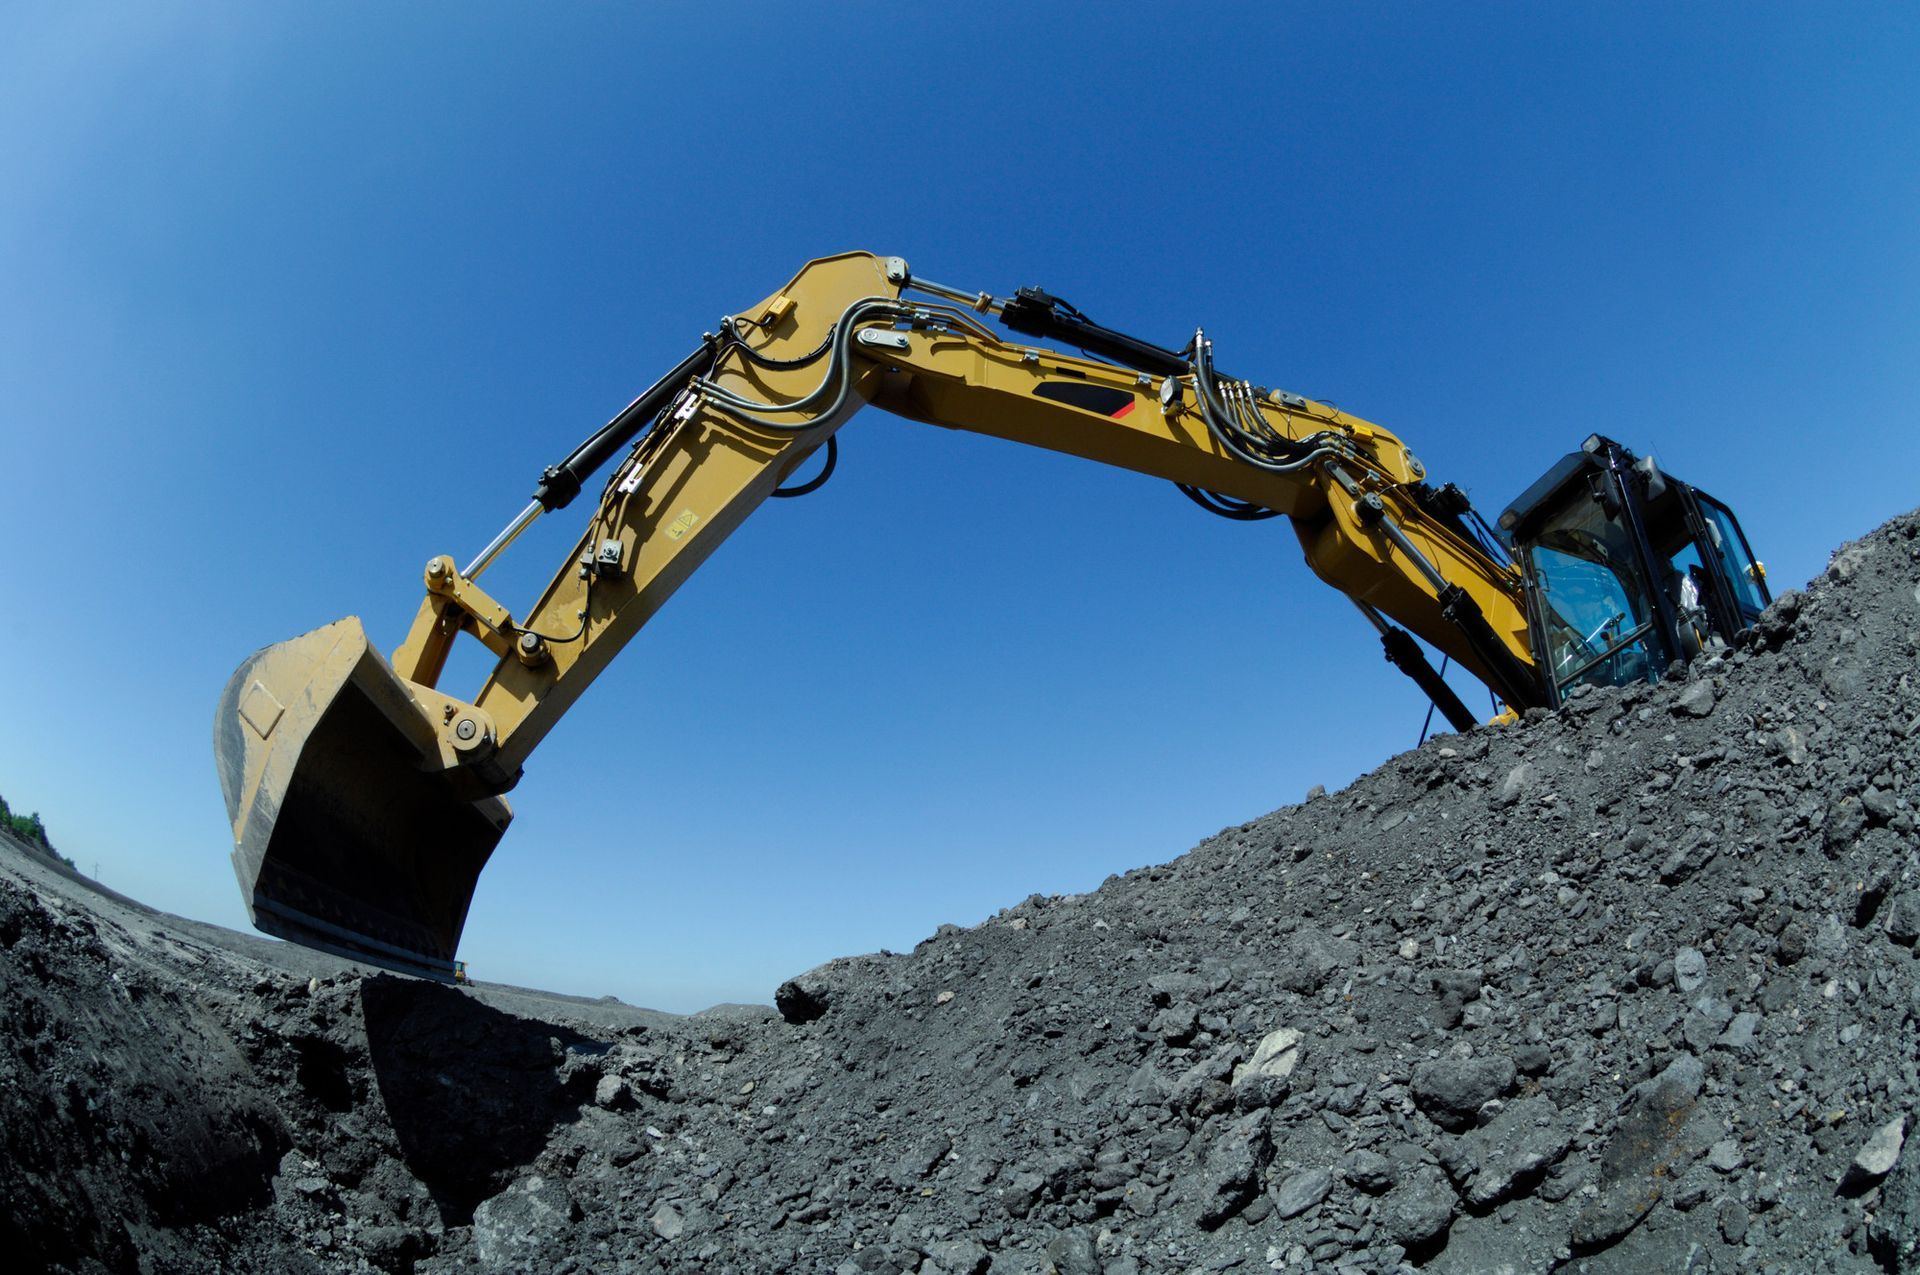 a yellow excavator is digging in a pile of rocks